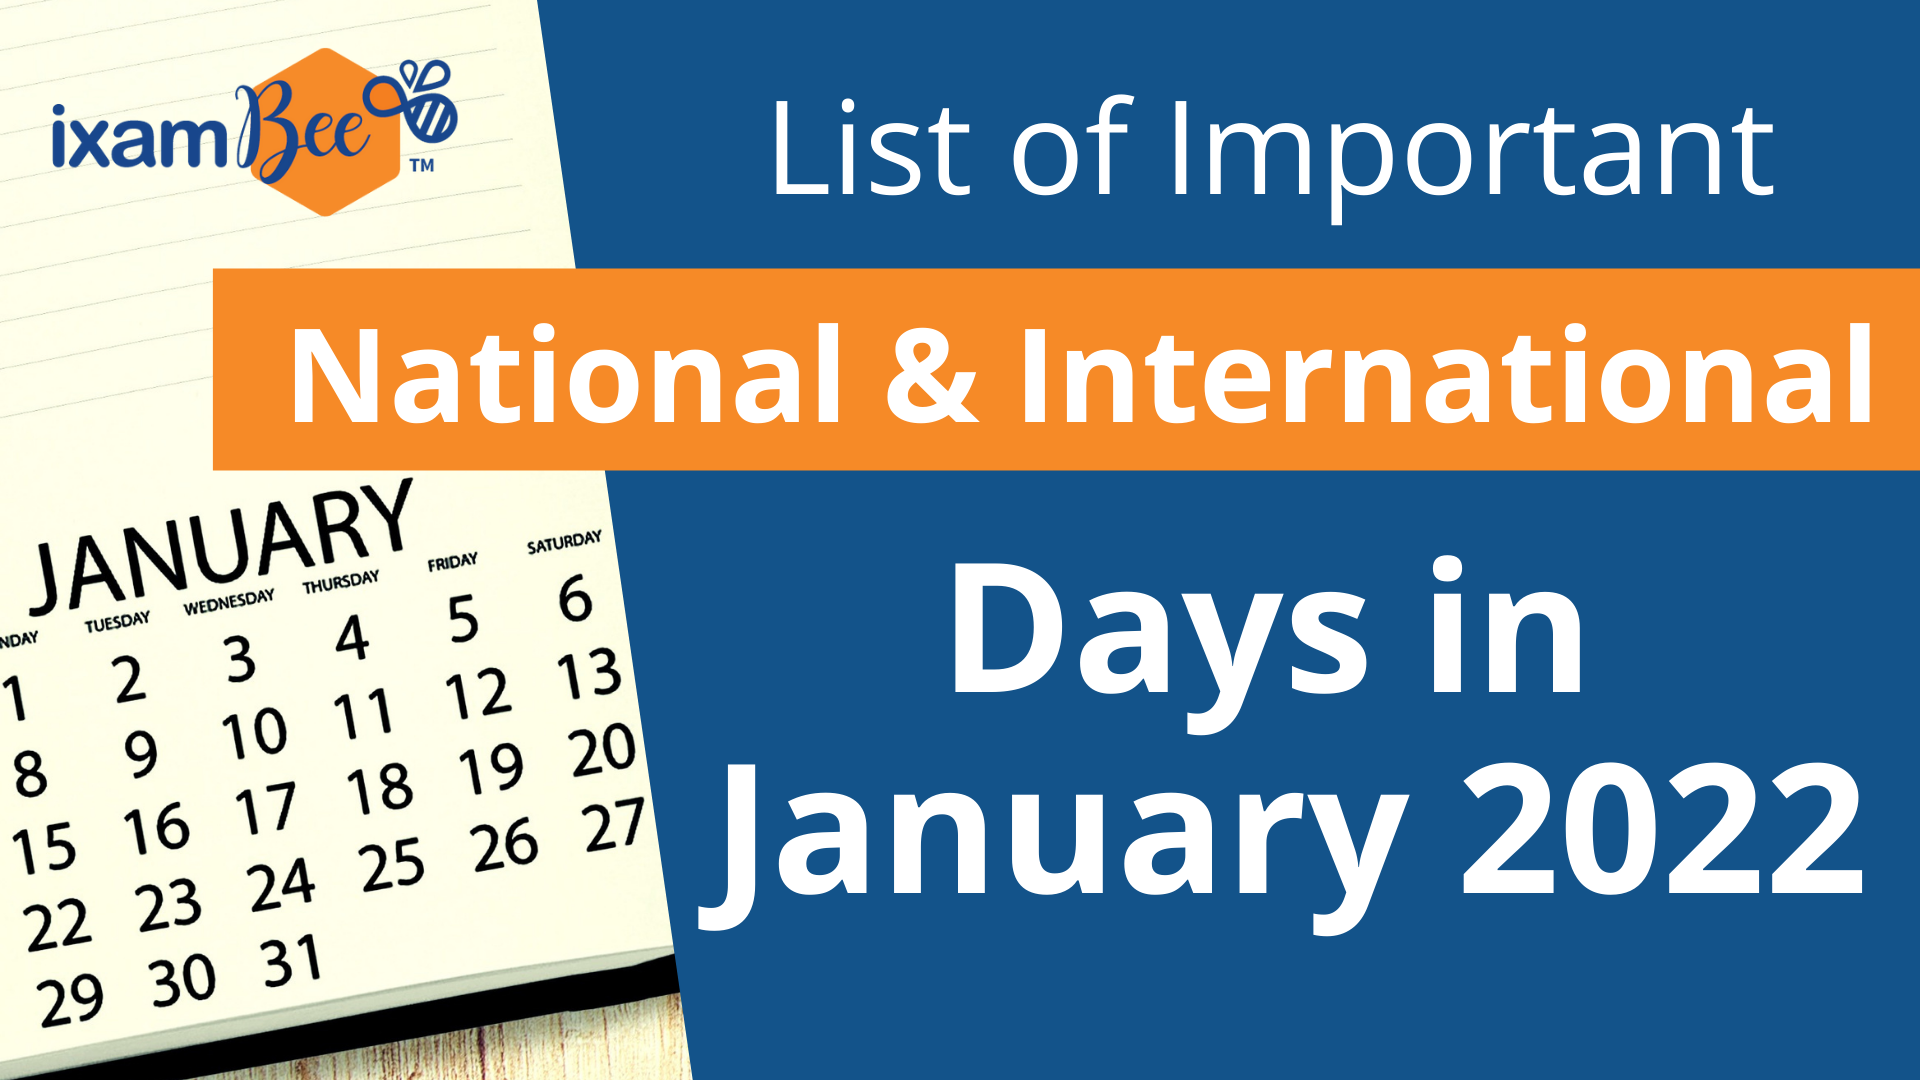 Important Days of January 2022: List of National & International Days in January